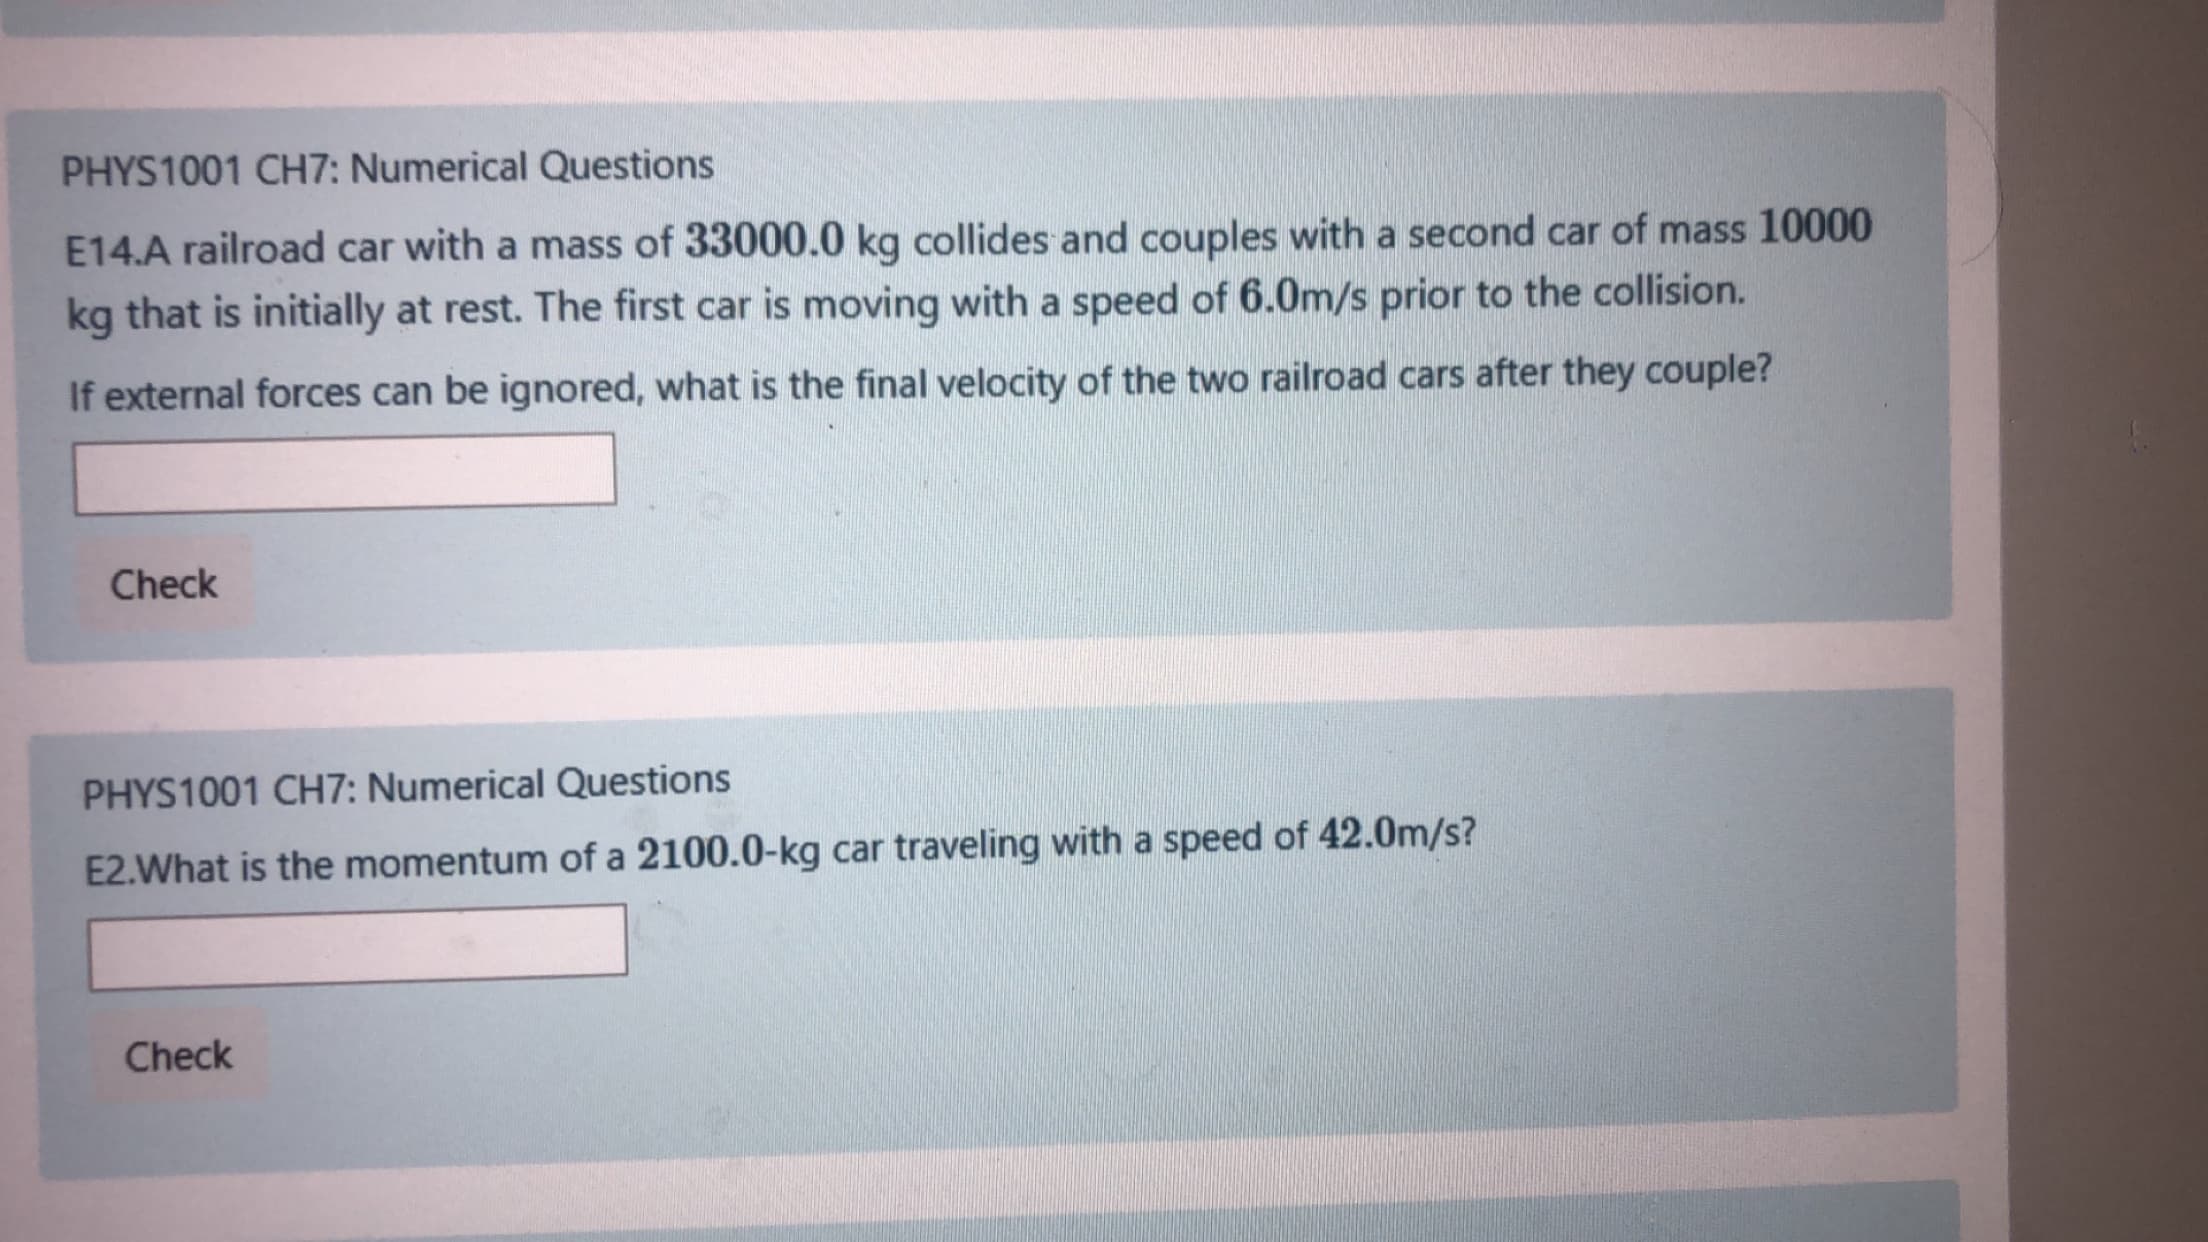 E14.A railroad car with a mass of 33000.0 kg collides and couples with a second car of mass 10000
kg that is initially at rest. The first car is moving with a speed of 6.0m/s prior to the collision.
If external forces can be ignored, what is the final velocity of the two railroad cars after they couple?
